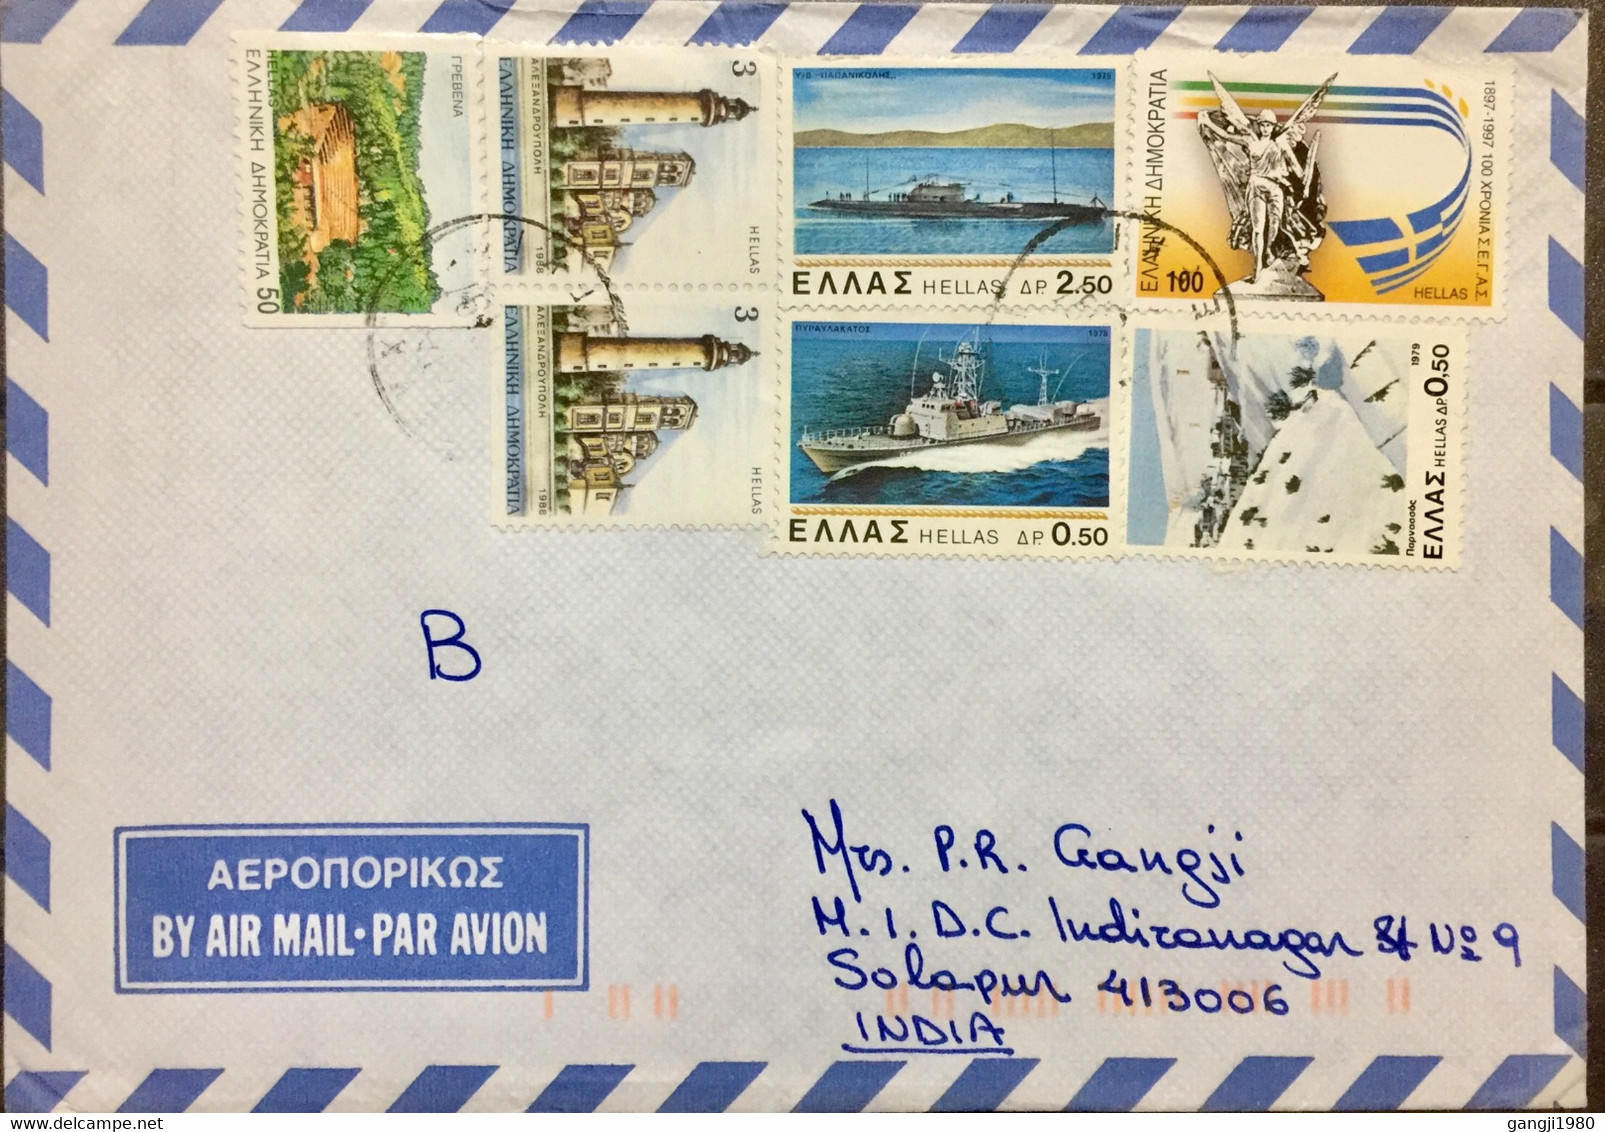 GREECE 1997, USED AIRMAIL COVER TO INDIA,DIFFERENT 7 STAMPS SHIP ,LIGHT HOUSE,FLAG,NATURE,SNOW -MOUNTAIN STATUE, BUILDIN - 1941-45 Japanese Occupation